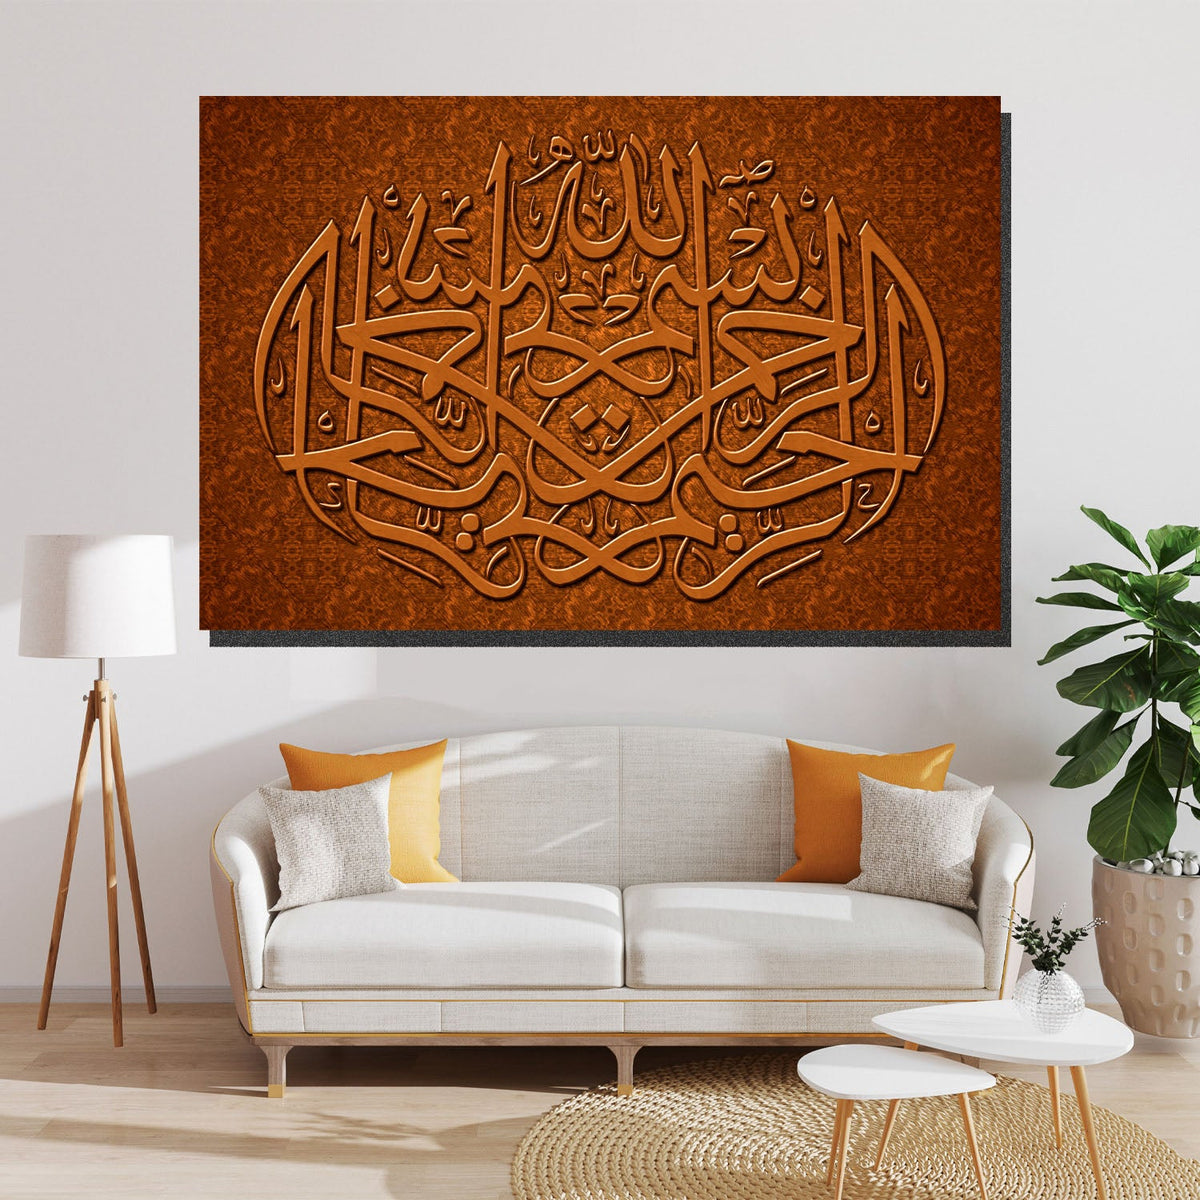 https://cdn.shopify.com/s/files/1/0387/9986/8044/products/BismallahArabicCalligraphyCanvasArtprintStretched-1.jpg